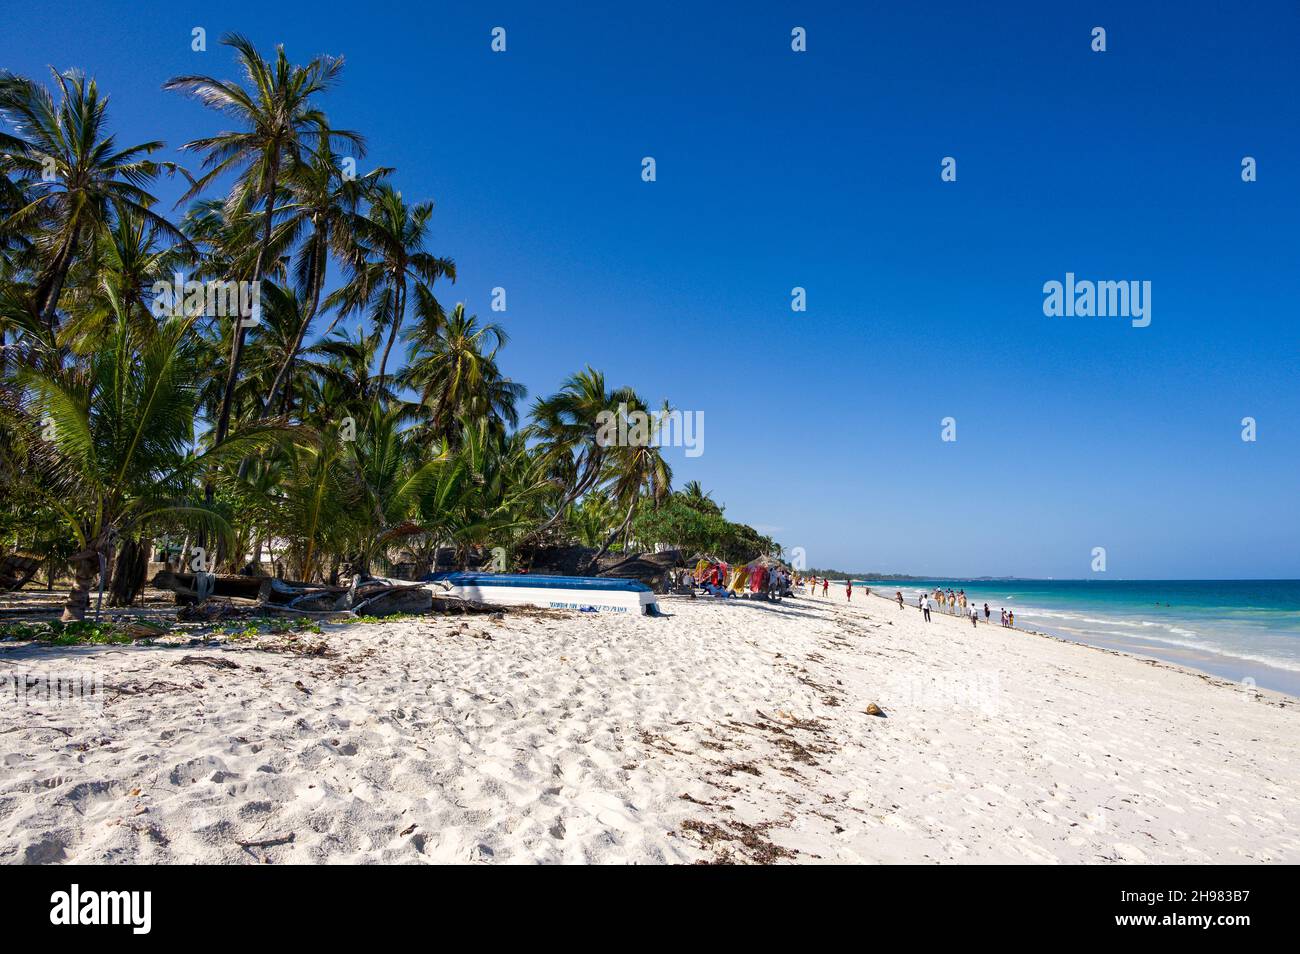 View along Diani beach lined by palm trees with tourists and locals walking on the beach, Kenya Stock Photo